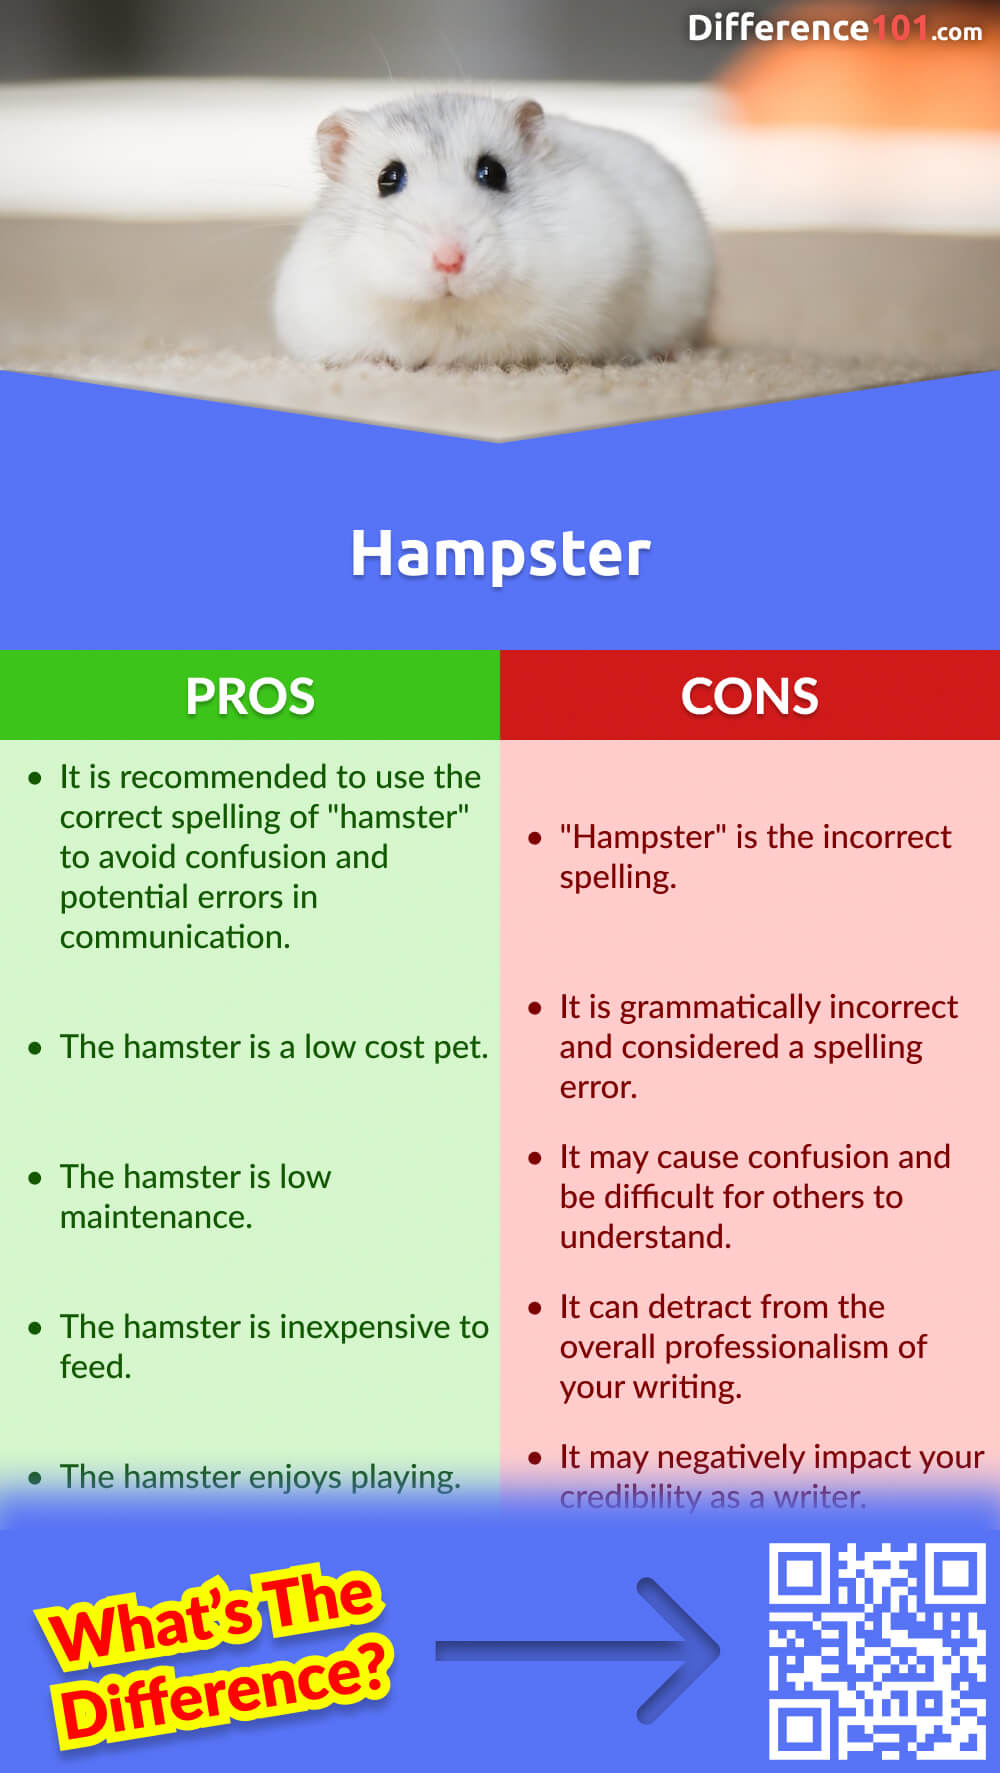 Hampster Pros & Cons